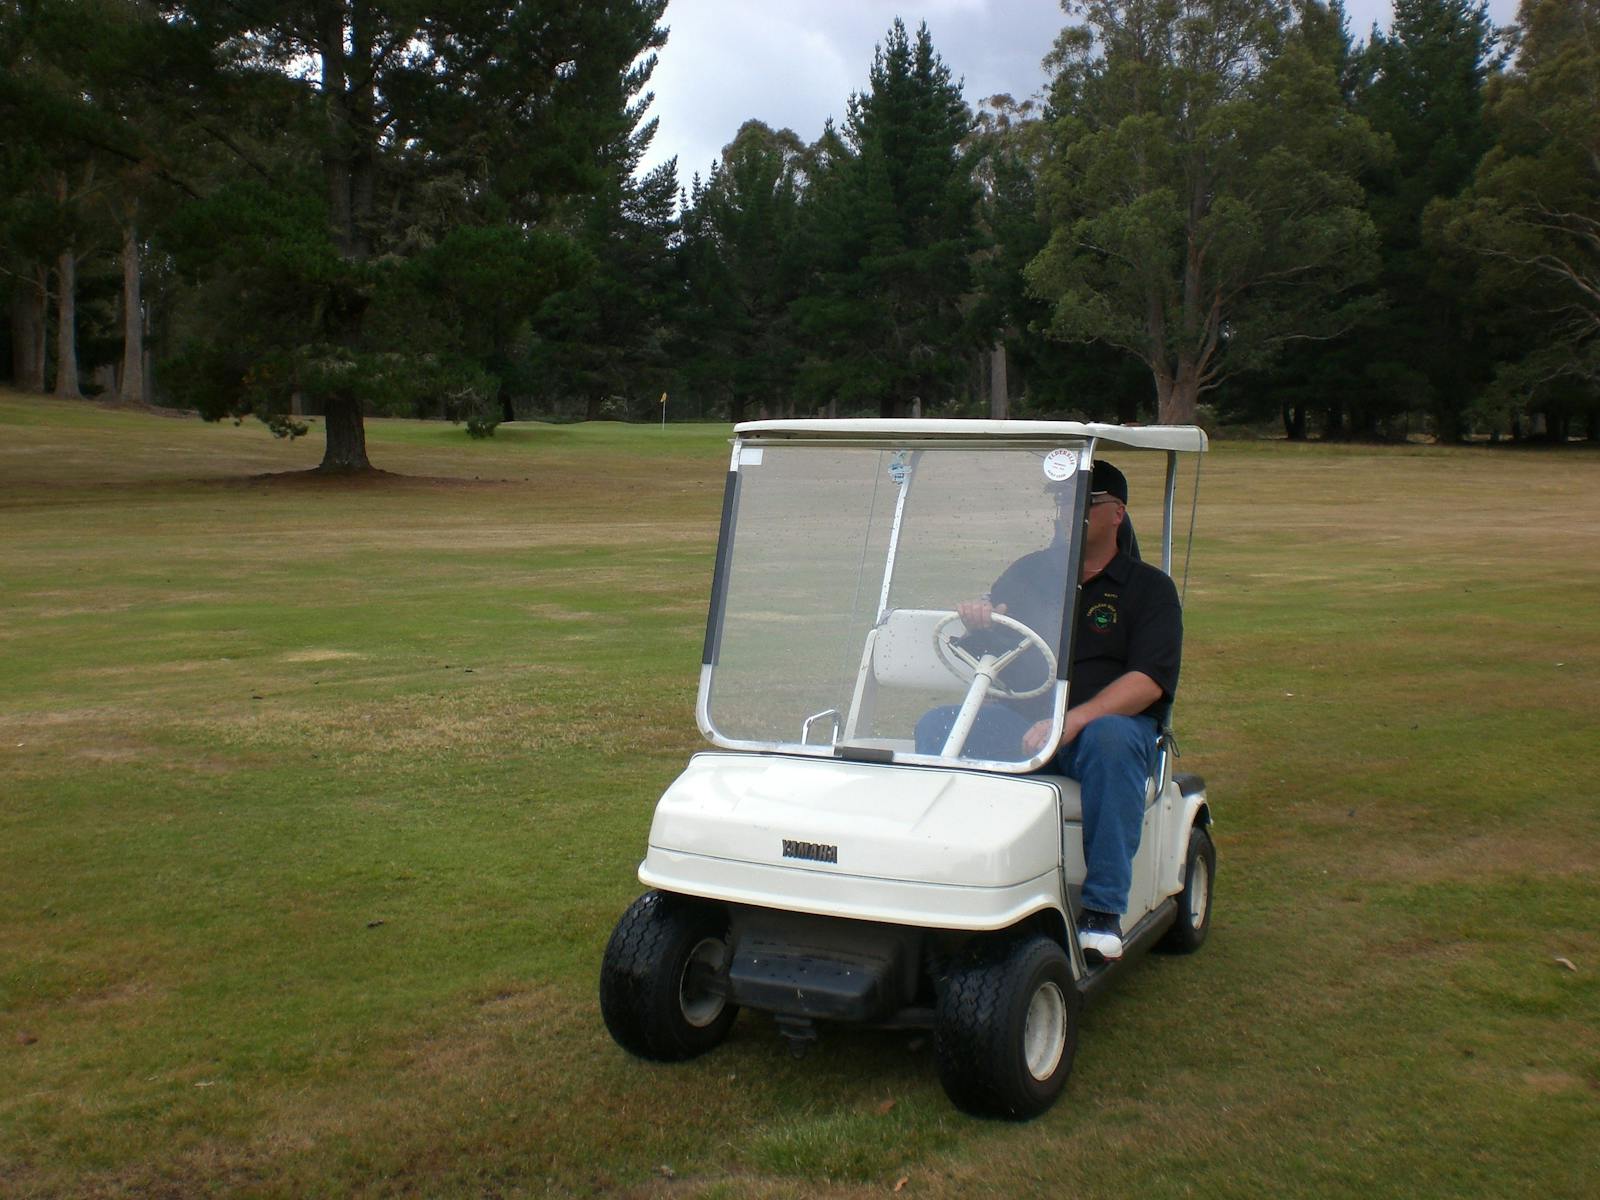 Tarraleah Golf Course is Tasmania's highest golf course.  It has 9 holes and golf buggies for hire.